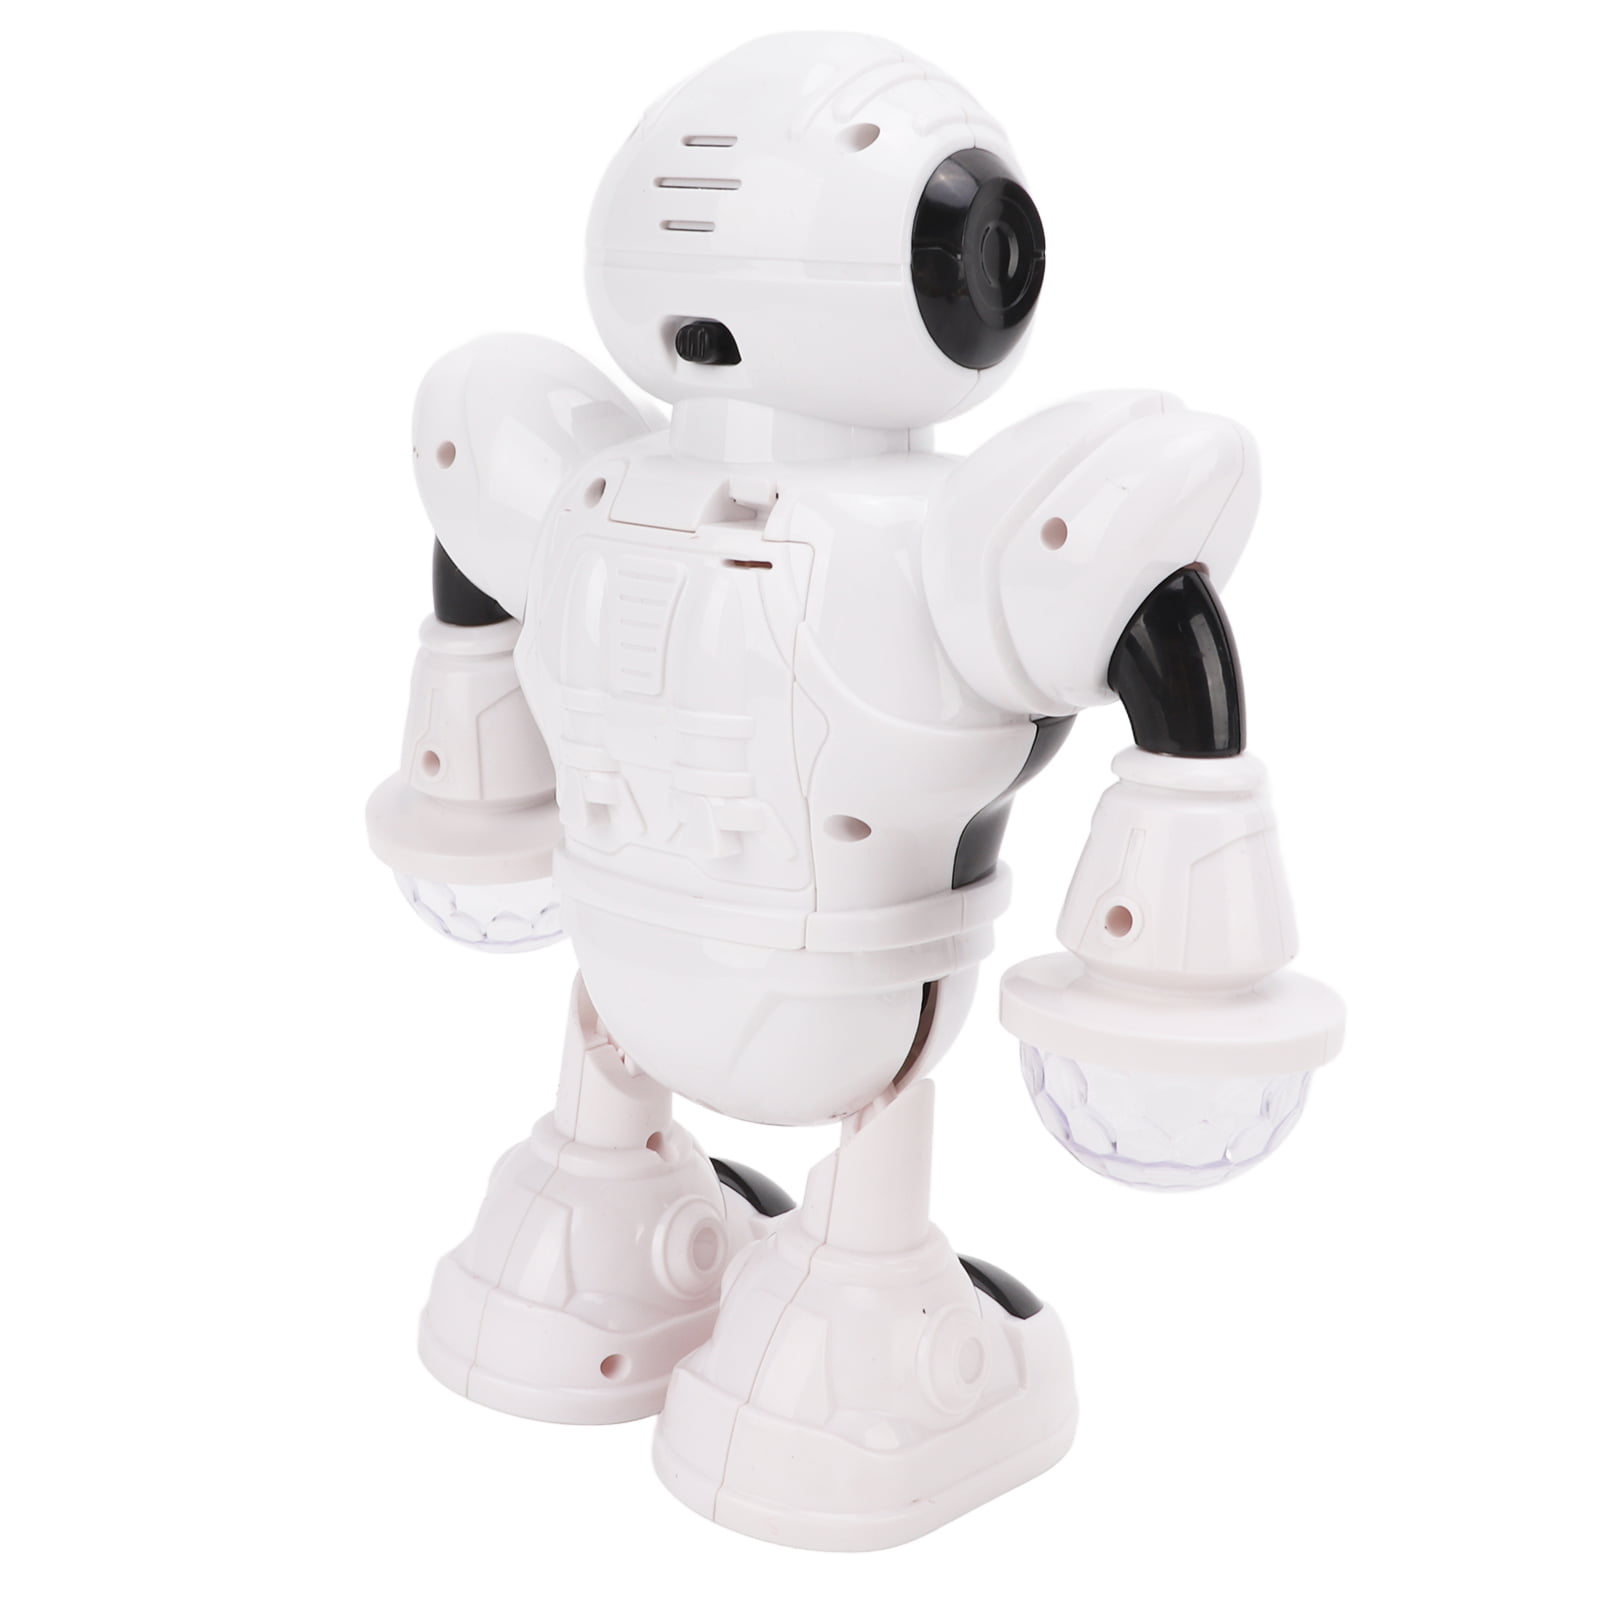 Elecronic Robot Toy, LED Lights Dancing Walking Resistant Dancing Toy For Pefect Gifts - Walmart.com